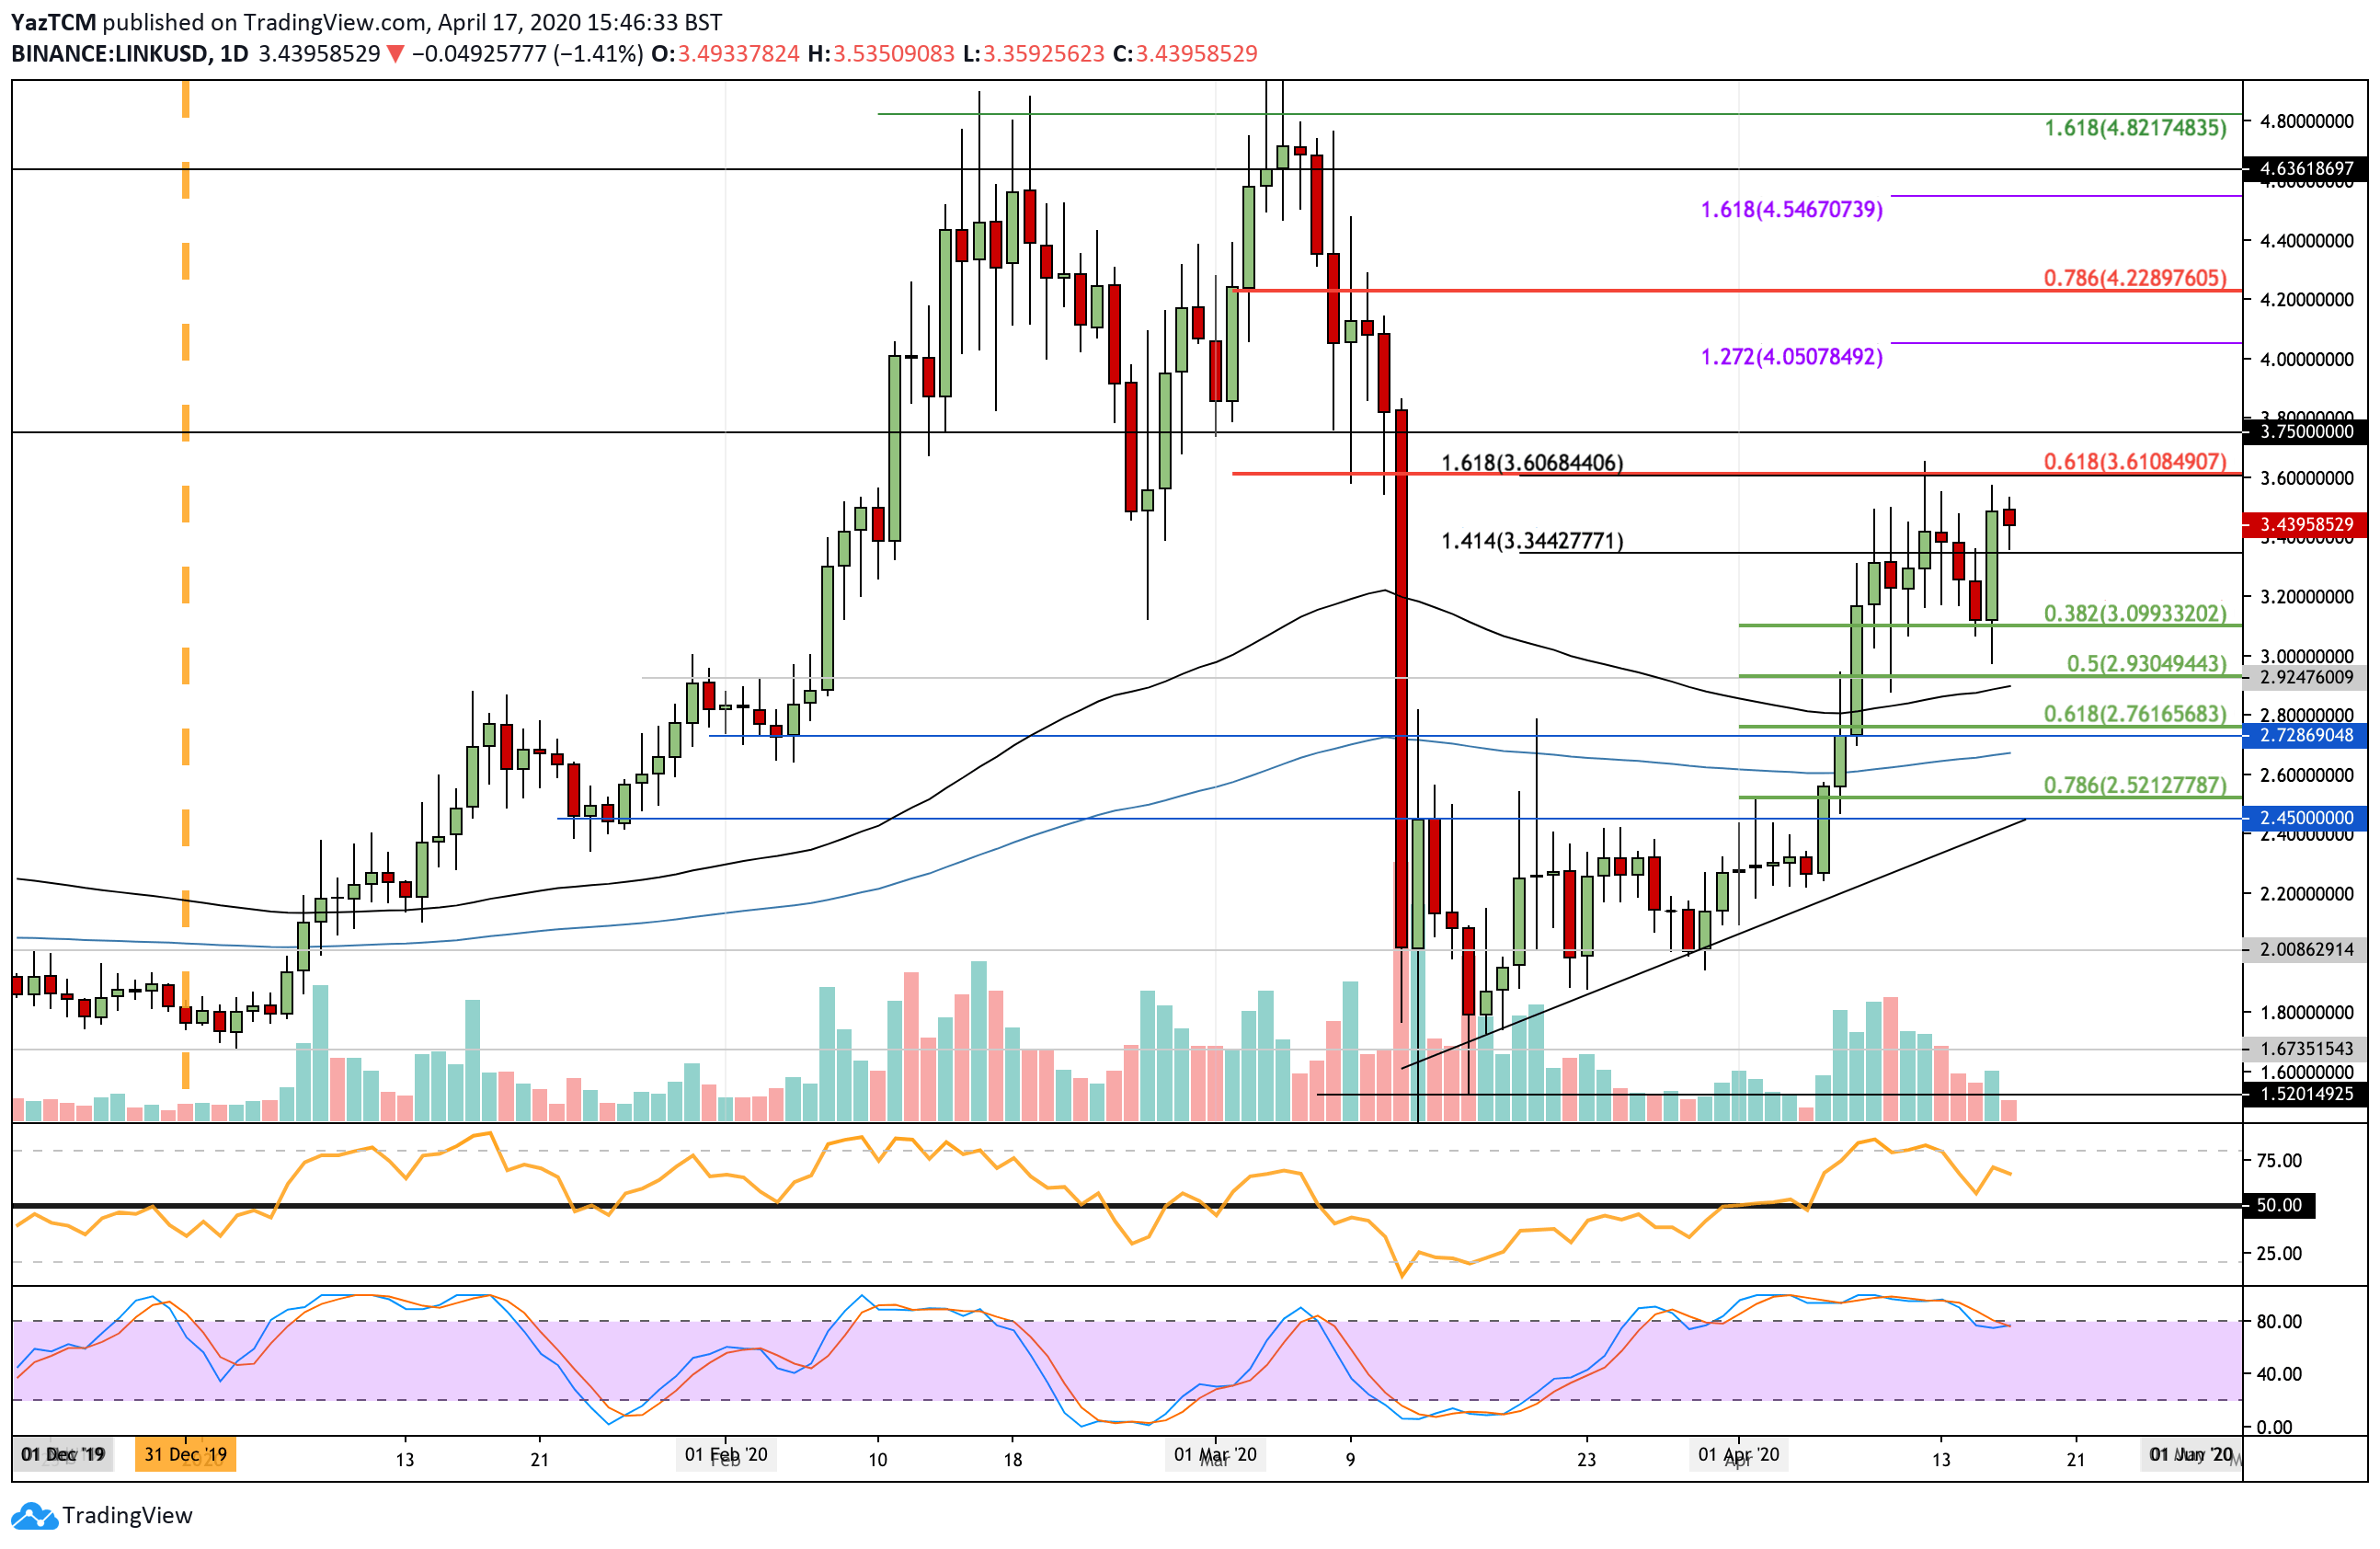 Crypto Price Analysis & Overview April 17th: Bitcoin, Ethereum, Ripple, Binance Coin, And Chainlink